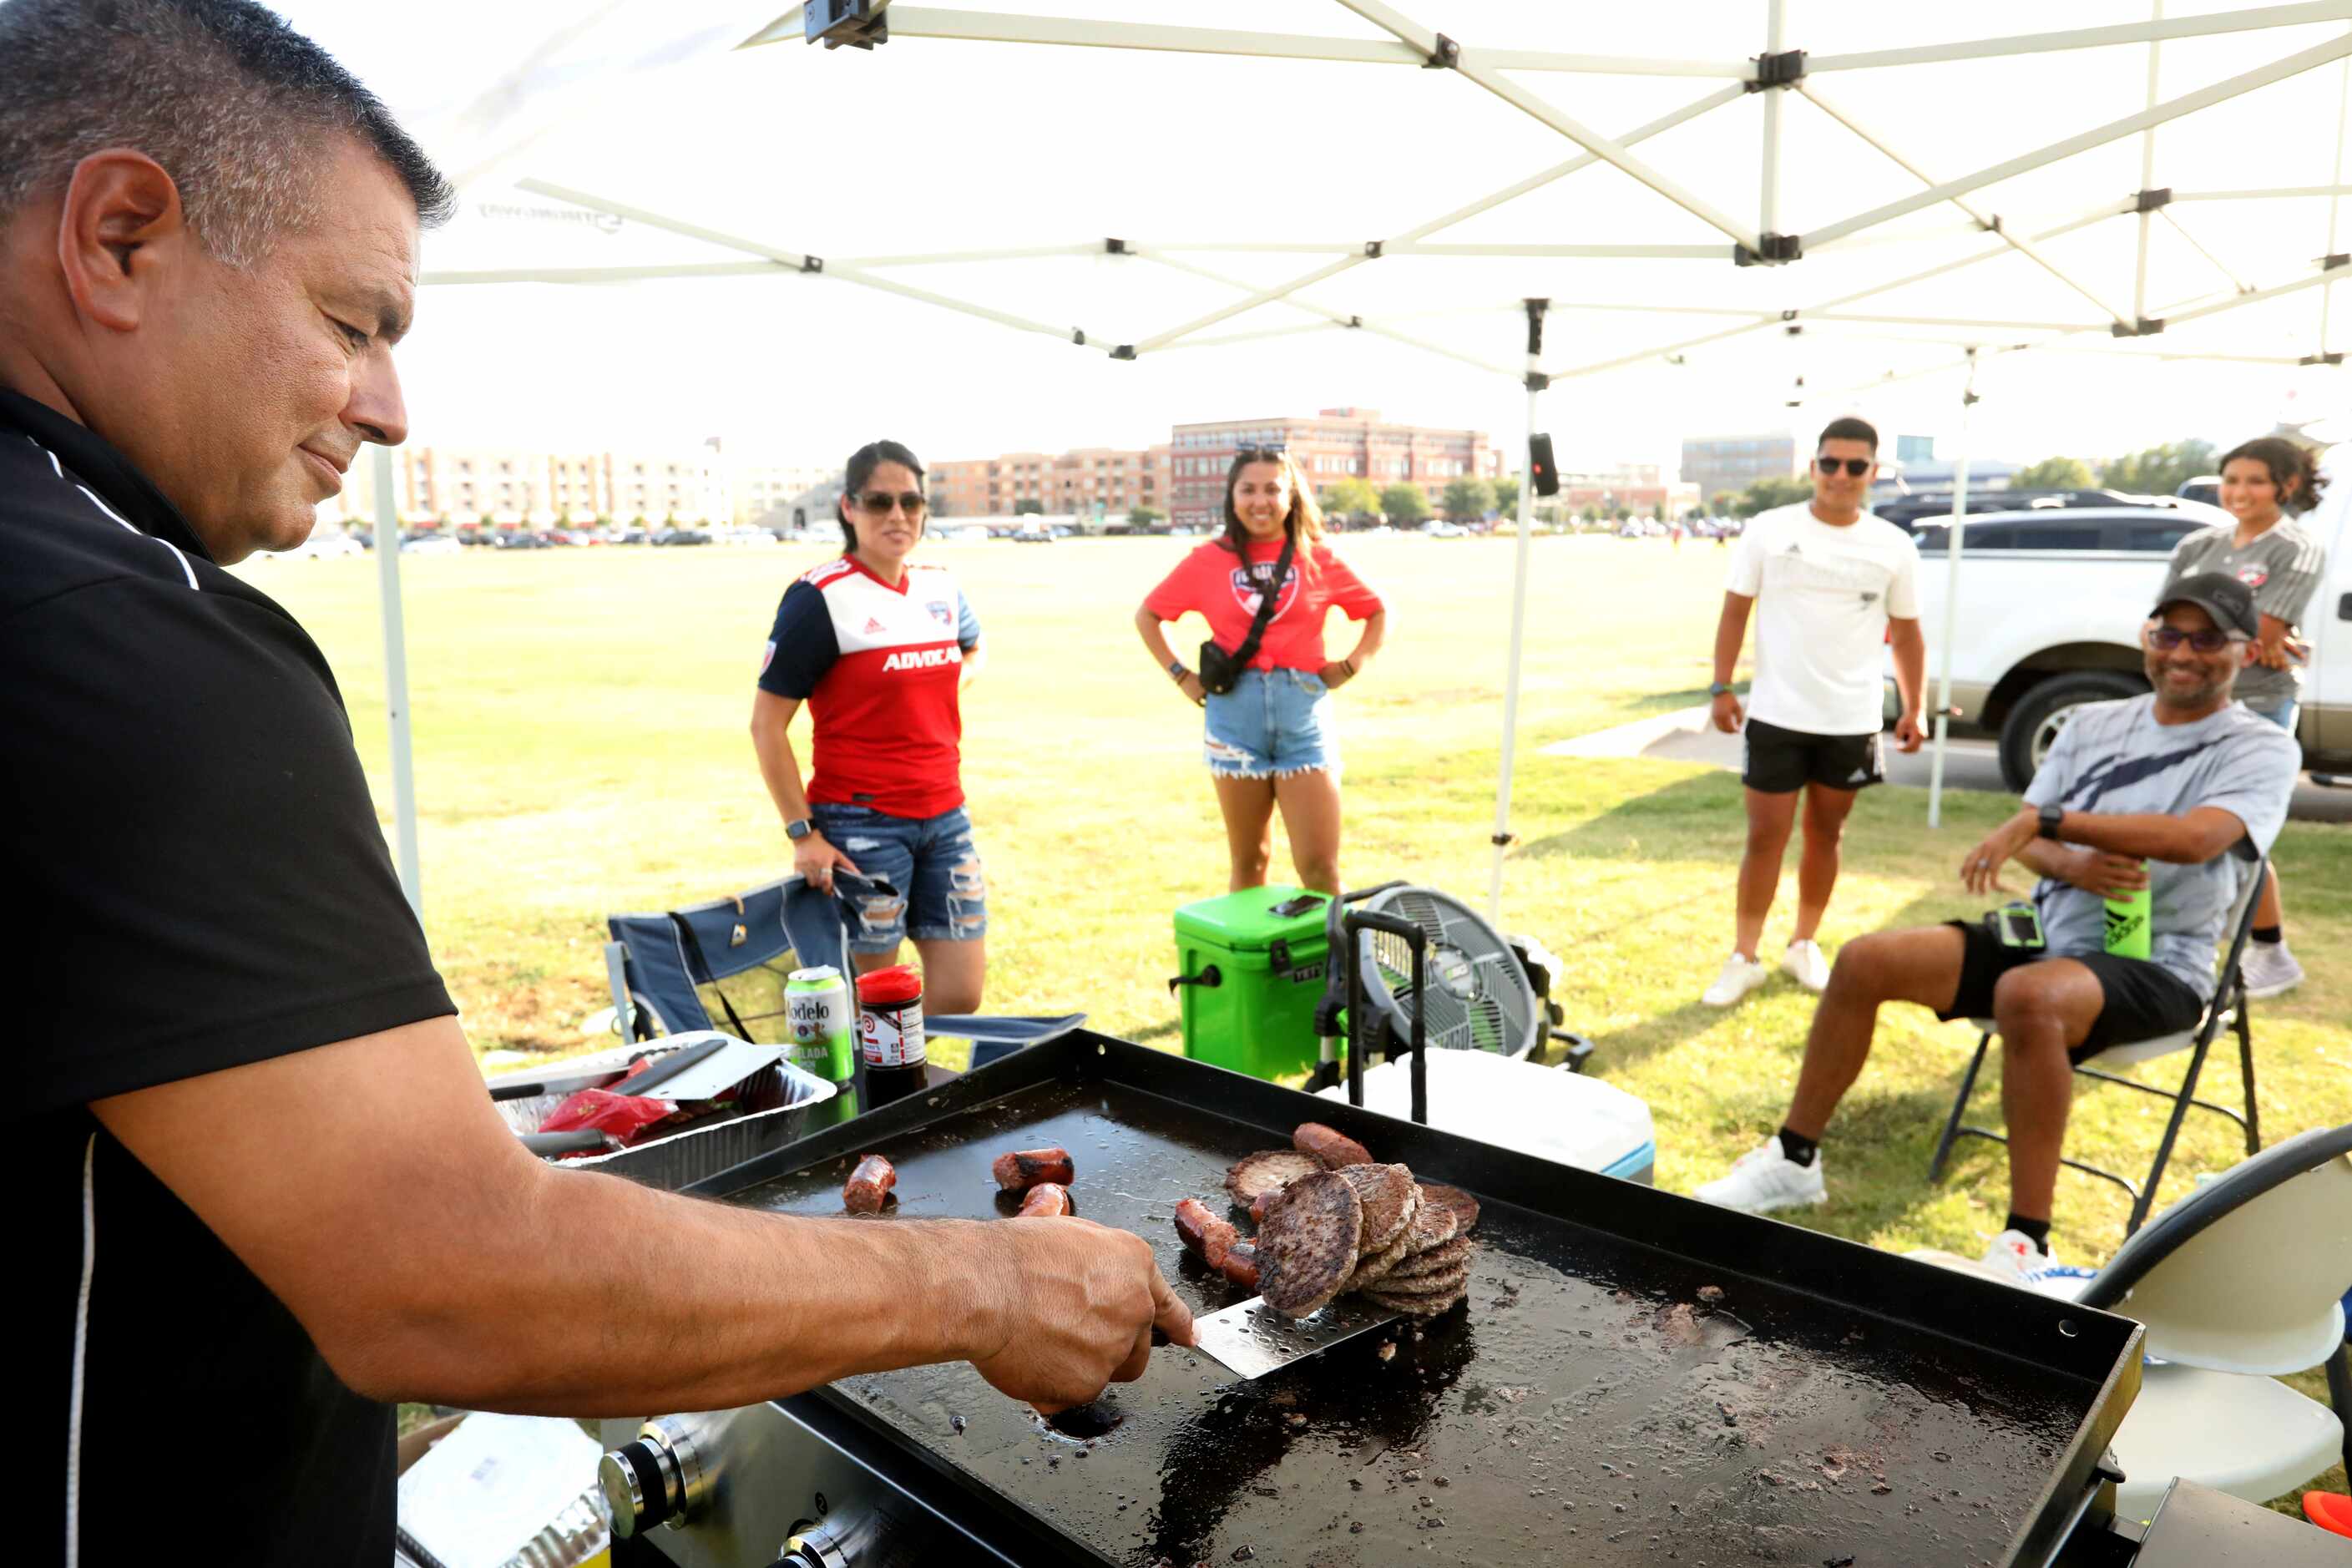 Tony Falcon, left, grills some burgers as he waits for the gates to open for an FC Dallas...